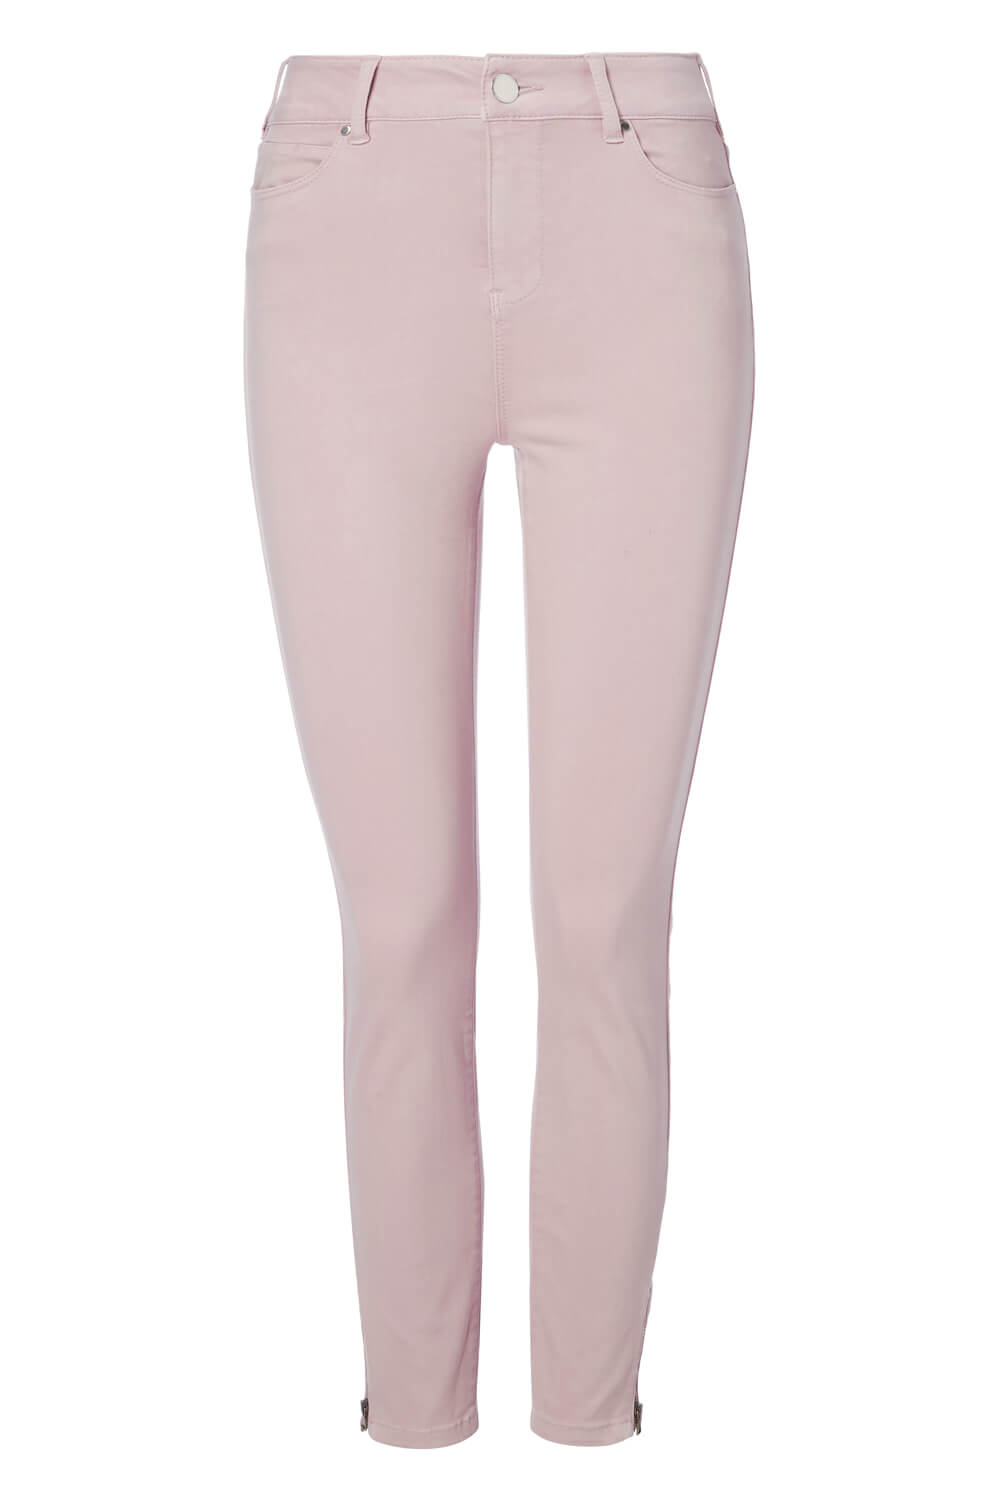 Cropped Jeans in Dusty Pink - Roman Originals UK